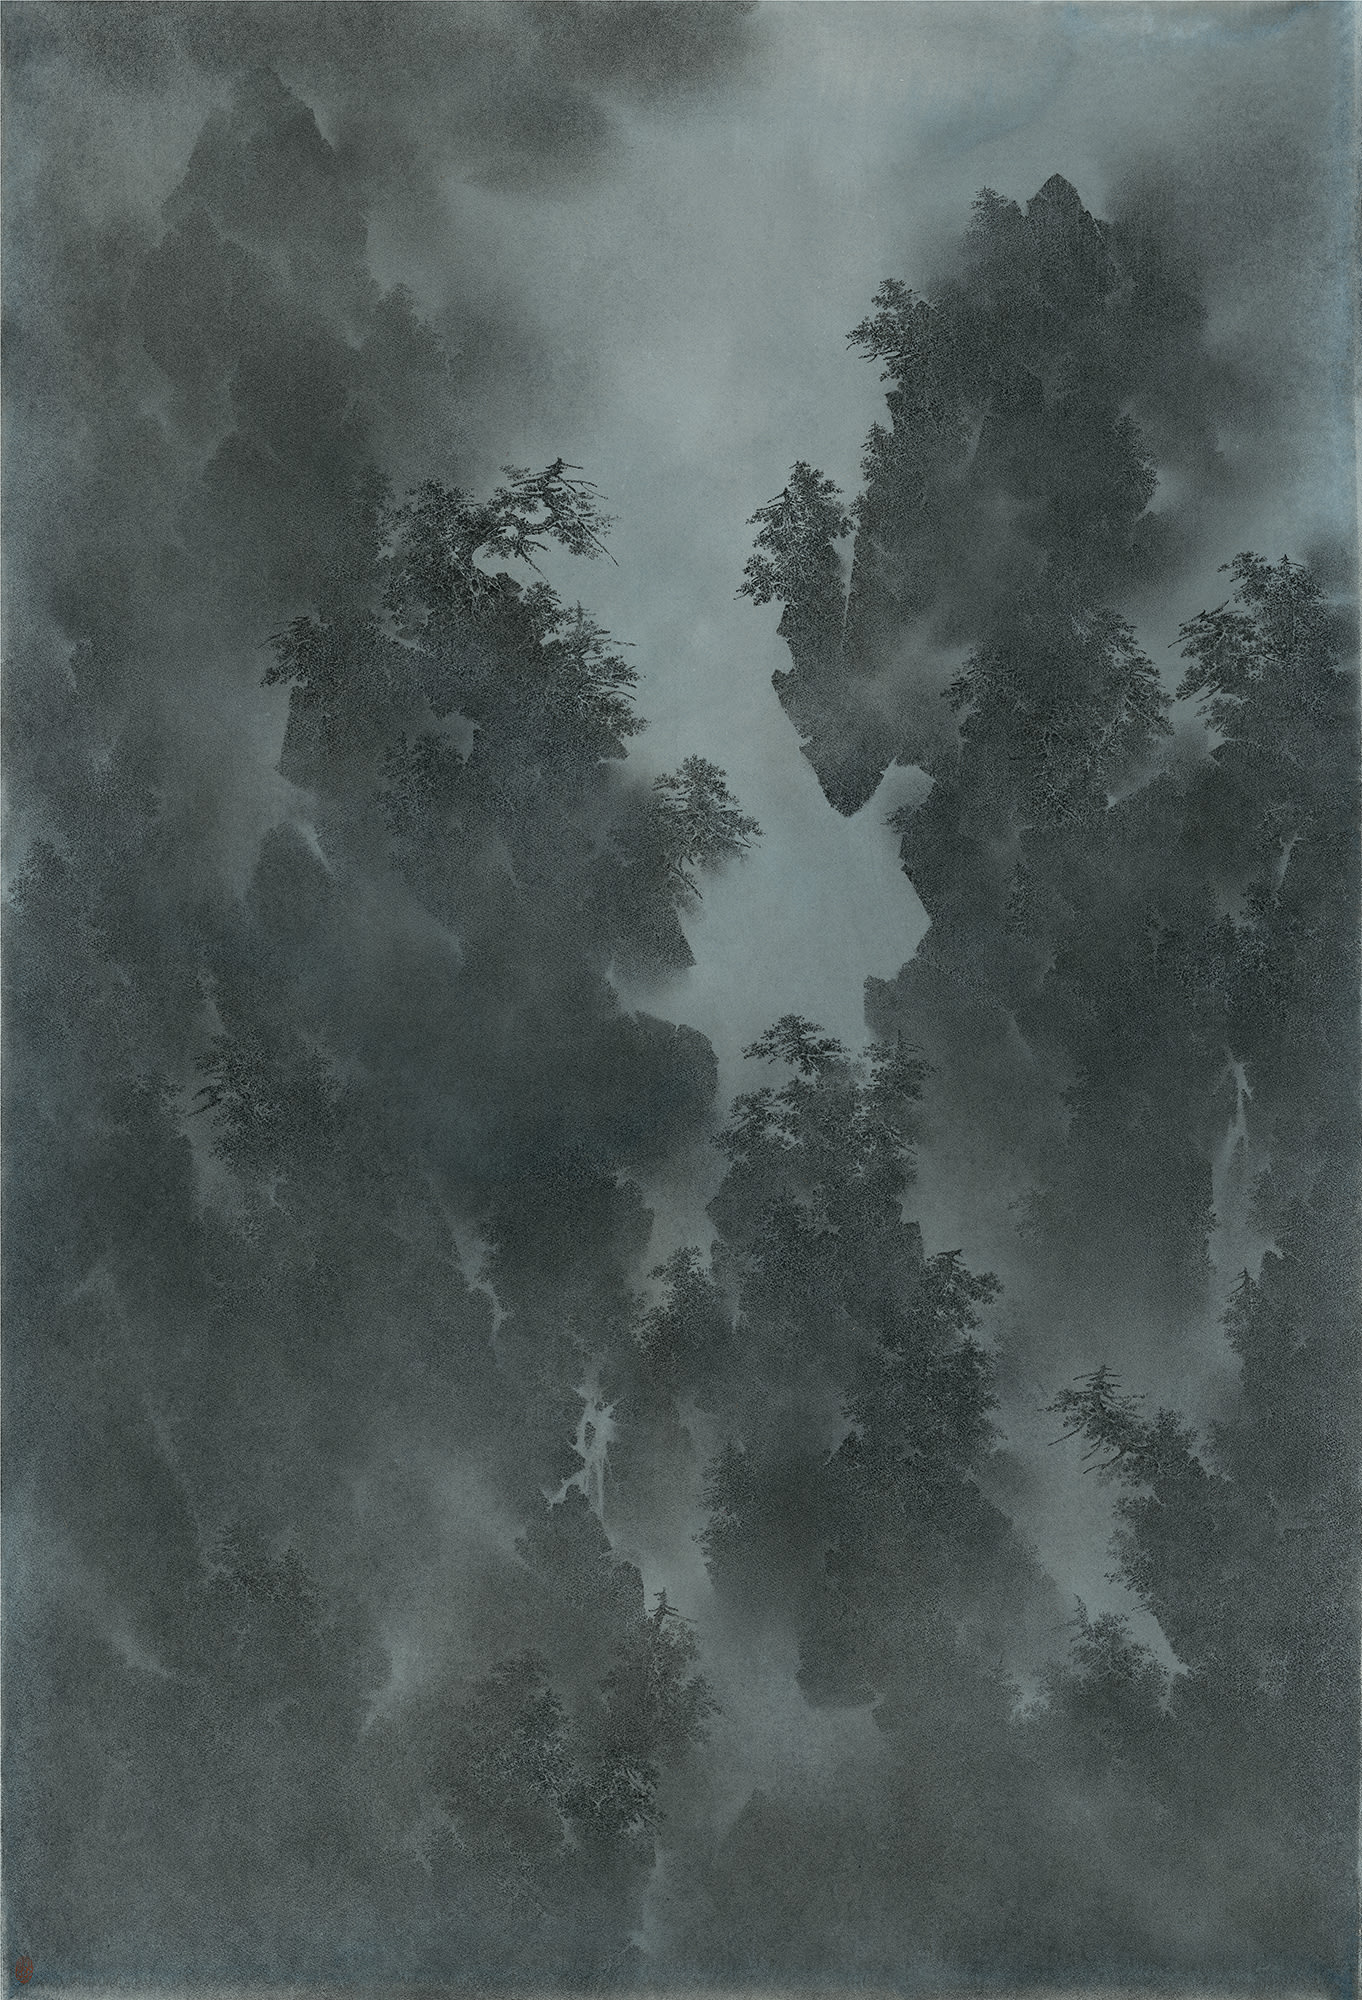 Cao Xiaoyang The Twenty-four Solar terms slight cold, 2019, Work on Paper, Charcoal on Paper, 151.0 x 103.0 (cm) - 59.4 x 40.6 (inch), USD 80,000 @ Hanart TZ Gallery